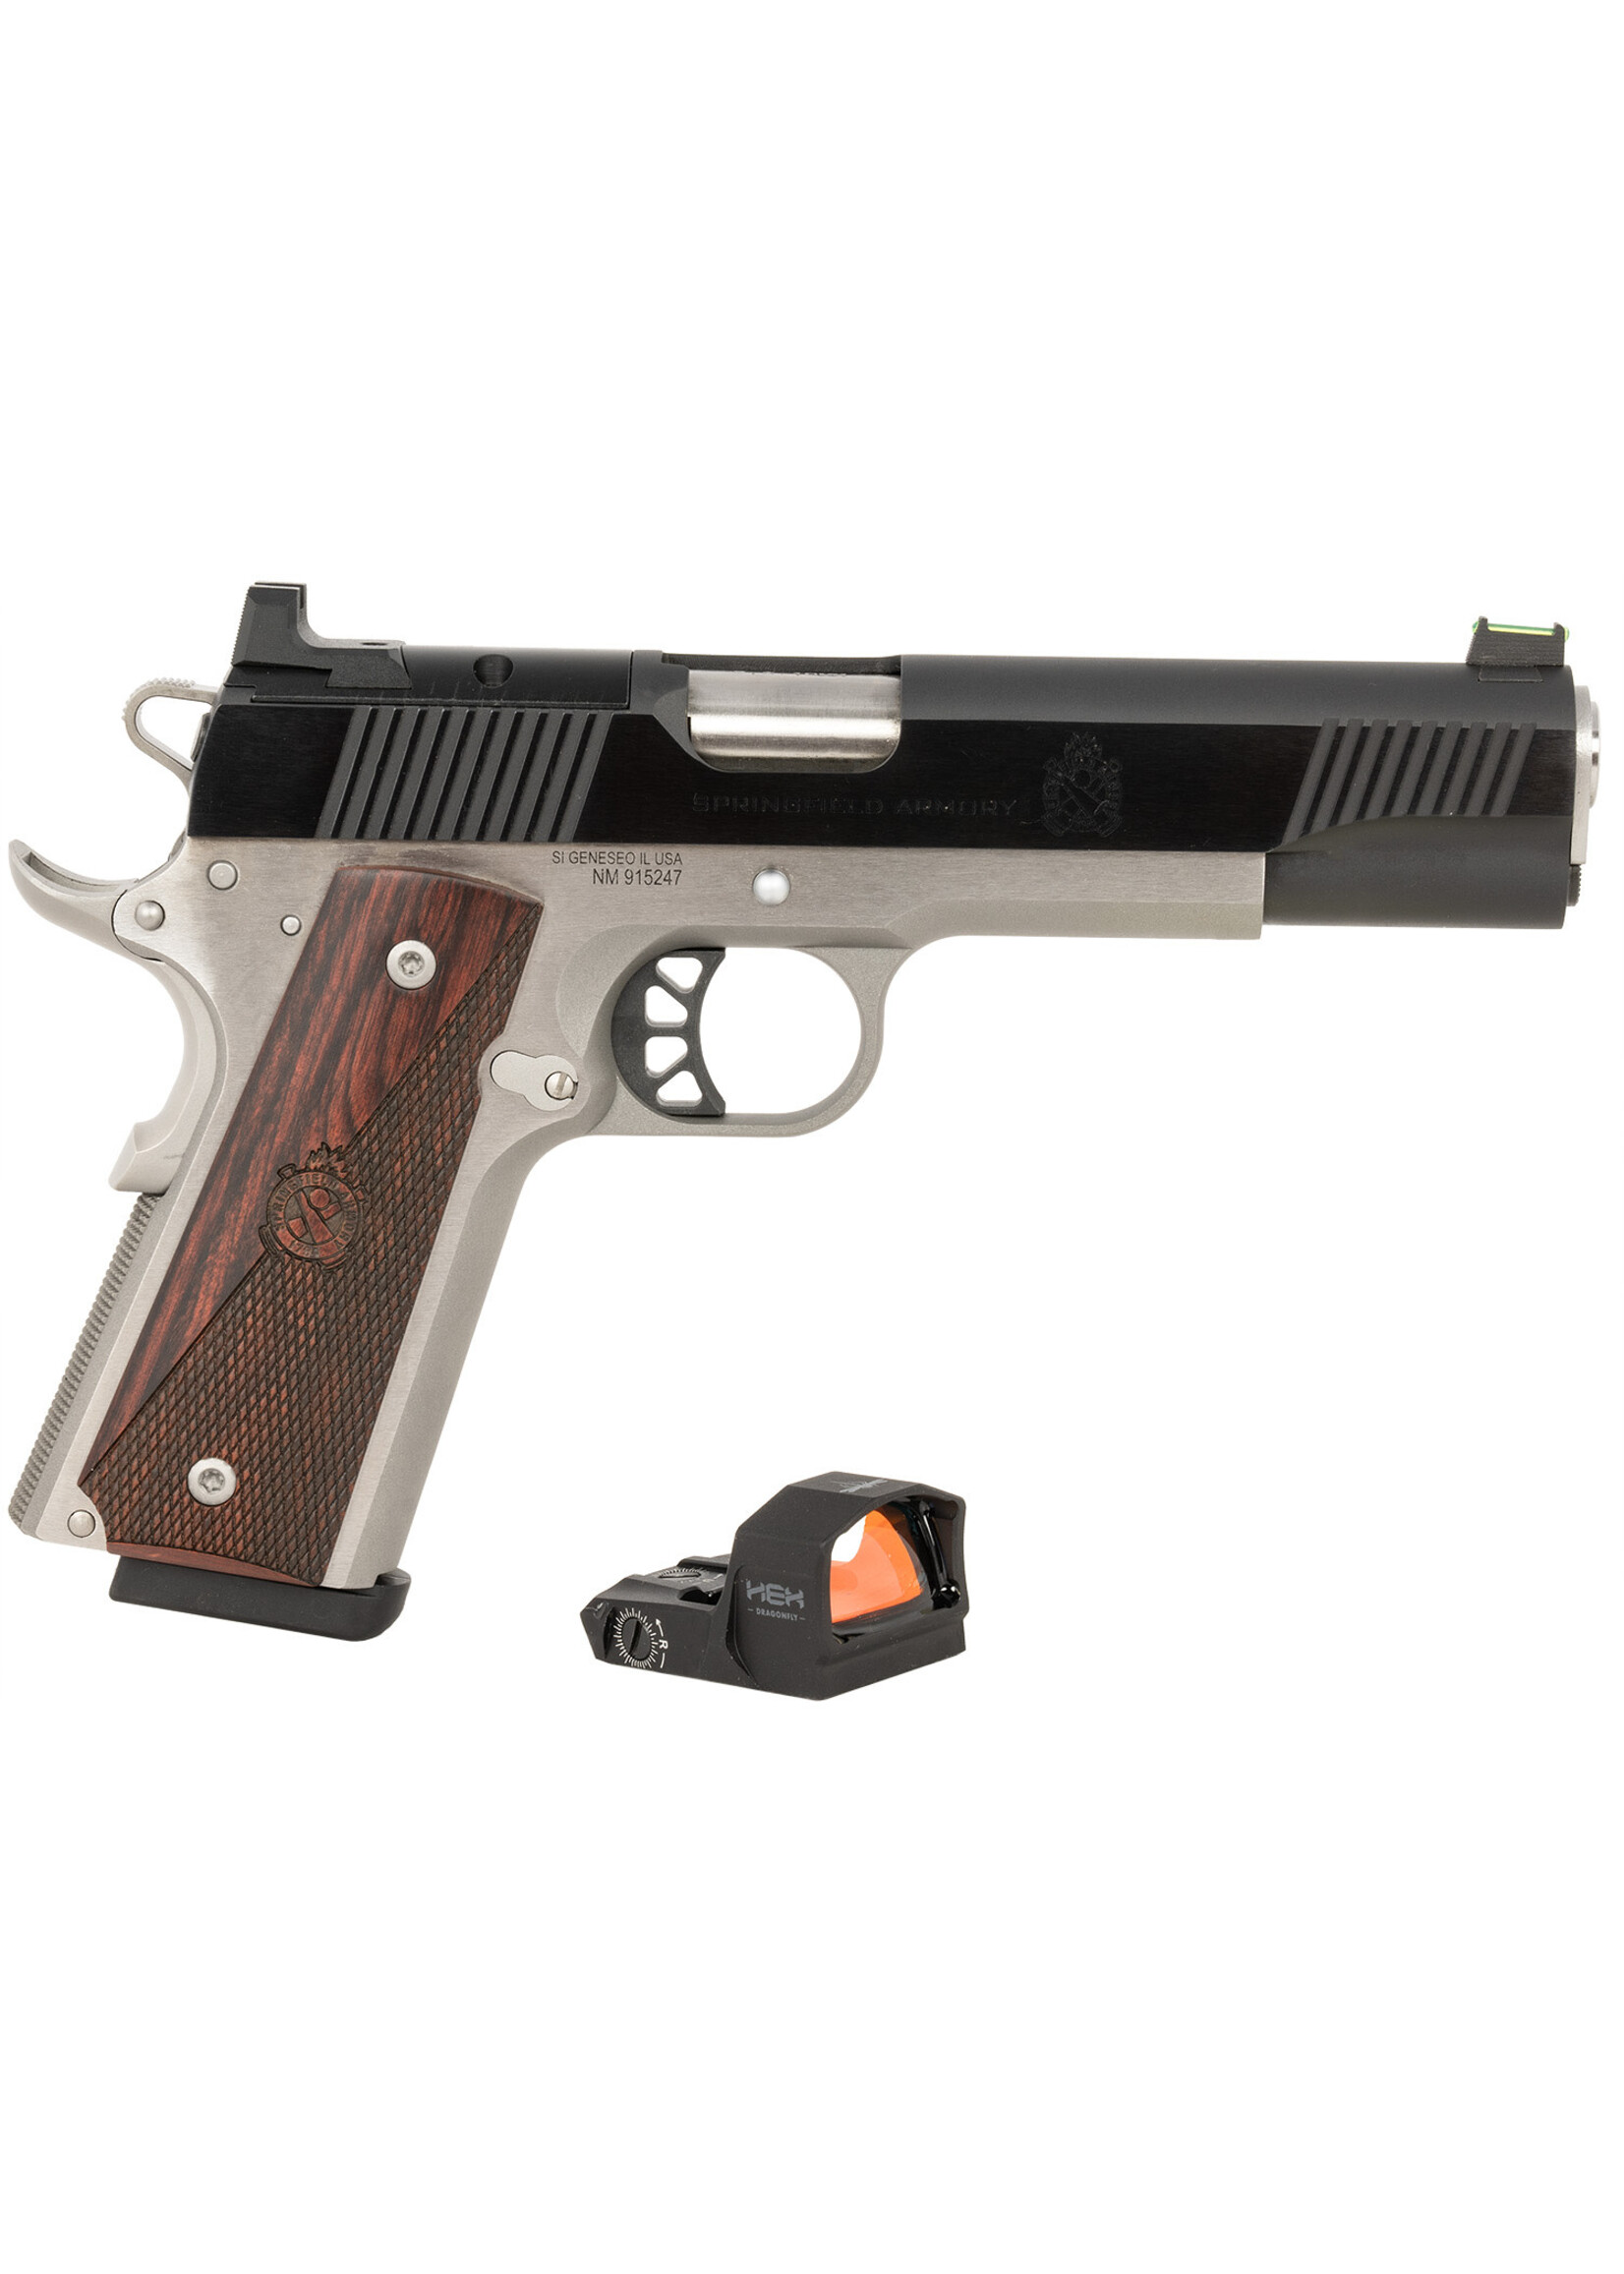 Springfield Armory Springfield Armory PX9121LAOSD 1911 Ronin 10mm Auto 8+1 5" Stainless Match Grade Barrel, Blued Serrated Carbon Steel Slide, Stainless Steel Frame w/Beavertail, Crossed Cannon Wood Grip, Hex Dragonfly Red Dot